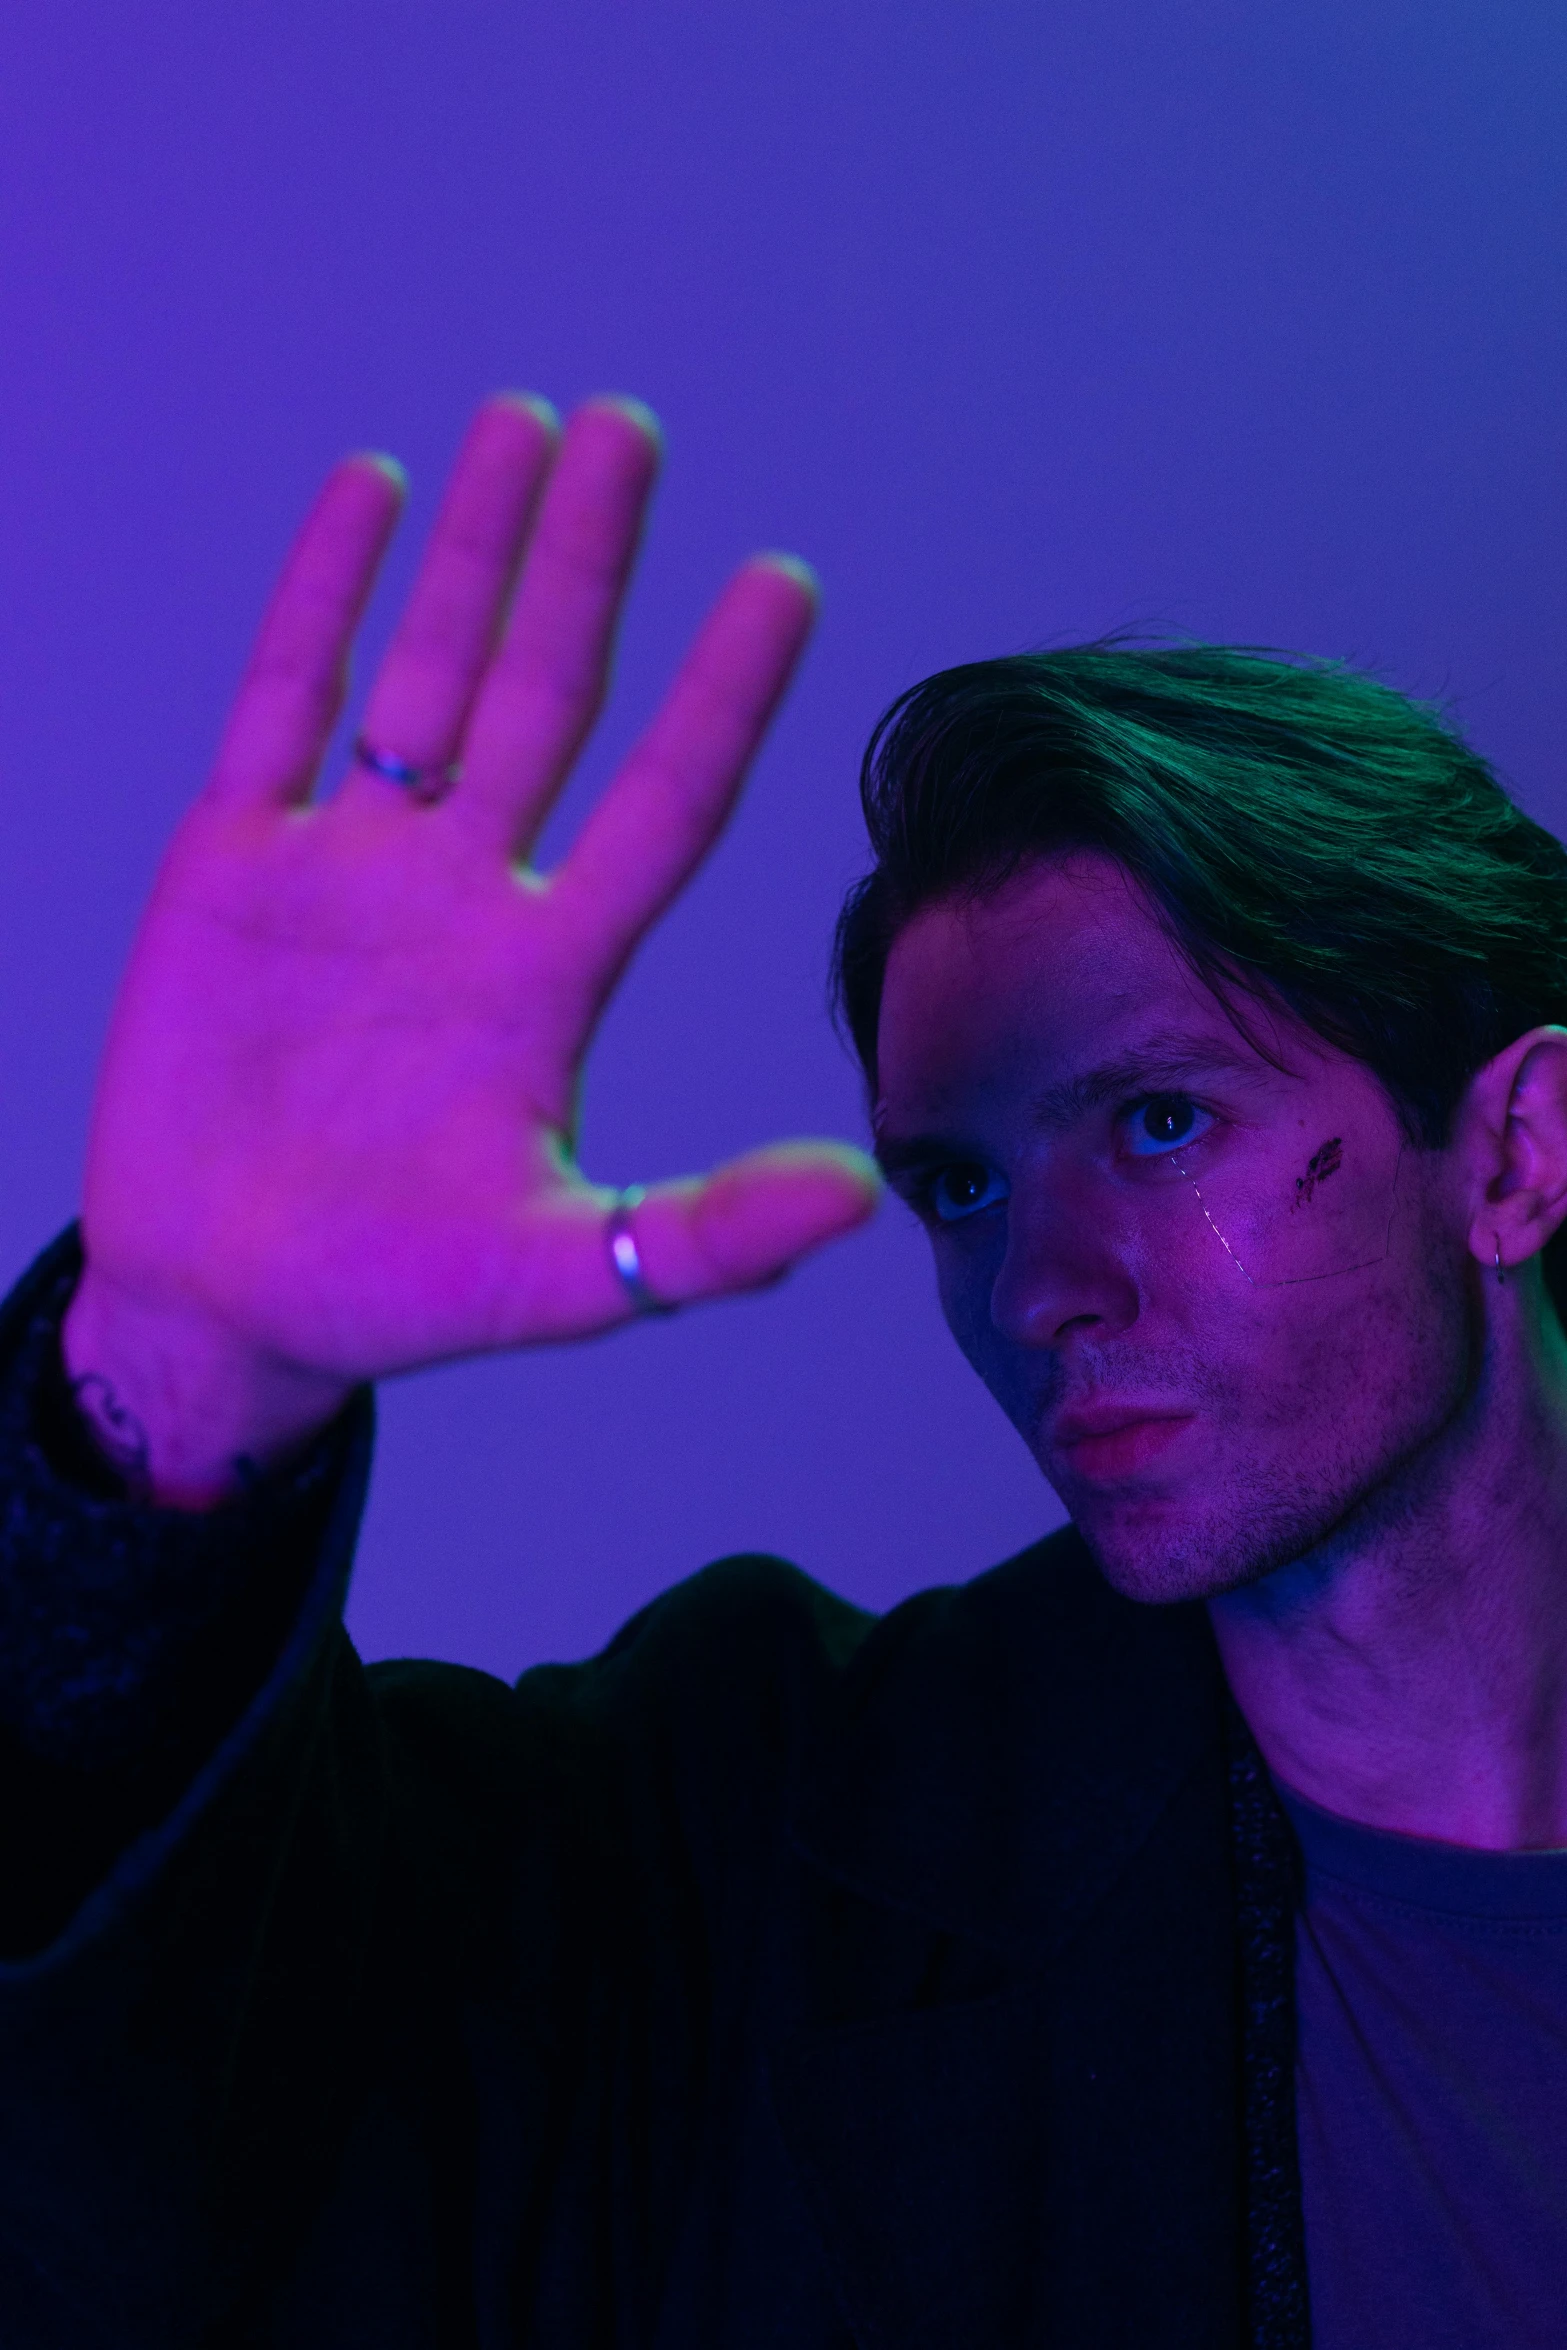 a man holding his hand up in front of his face, an album cover, unsplash, bauhaus, purple light, androgynous male, cheekbones, looking threatening